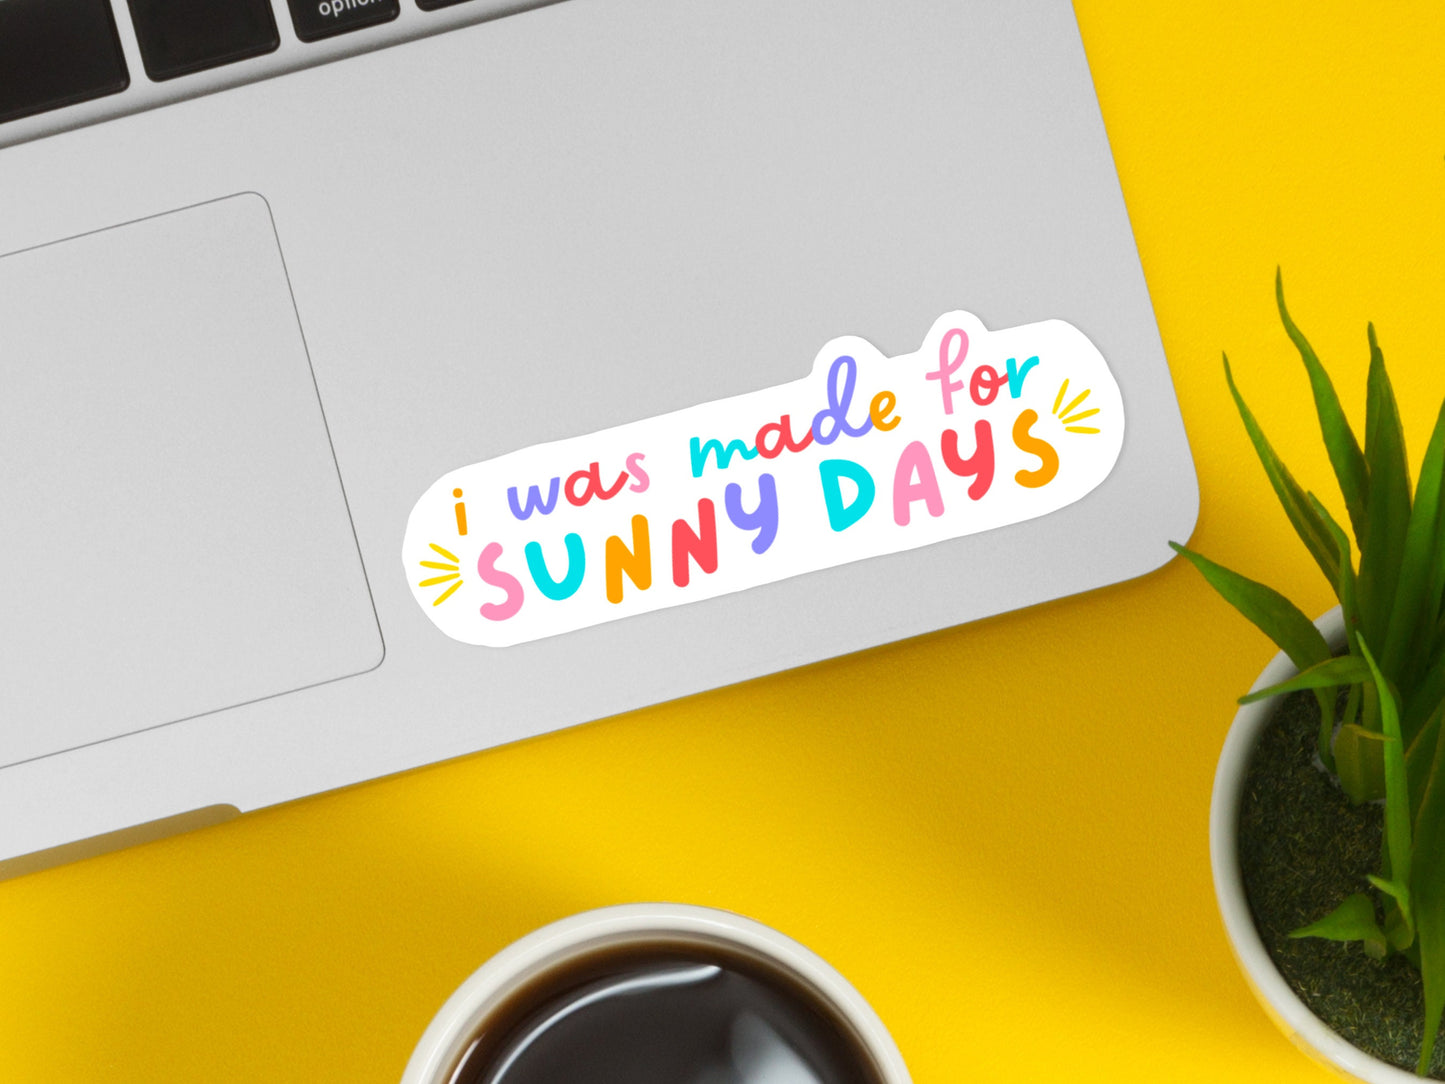 I Was Made For Sunny Days Sticker | Aesthetic Sticker | Transparent Decals